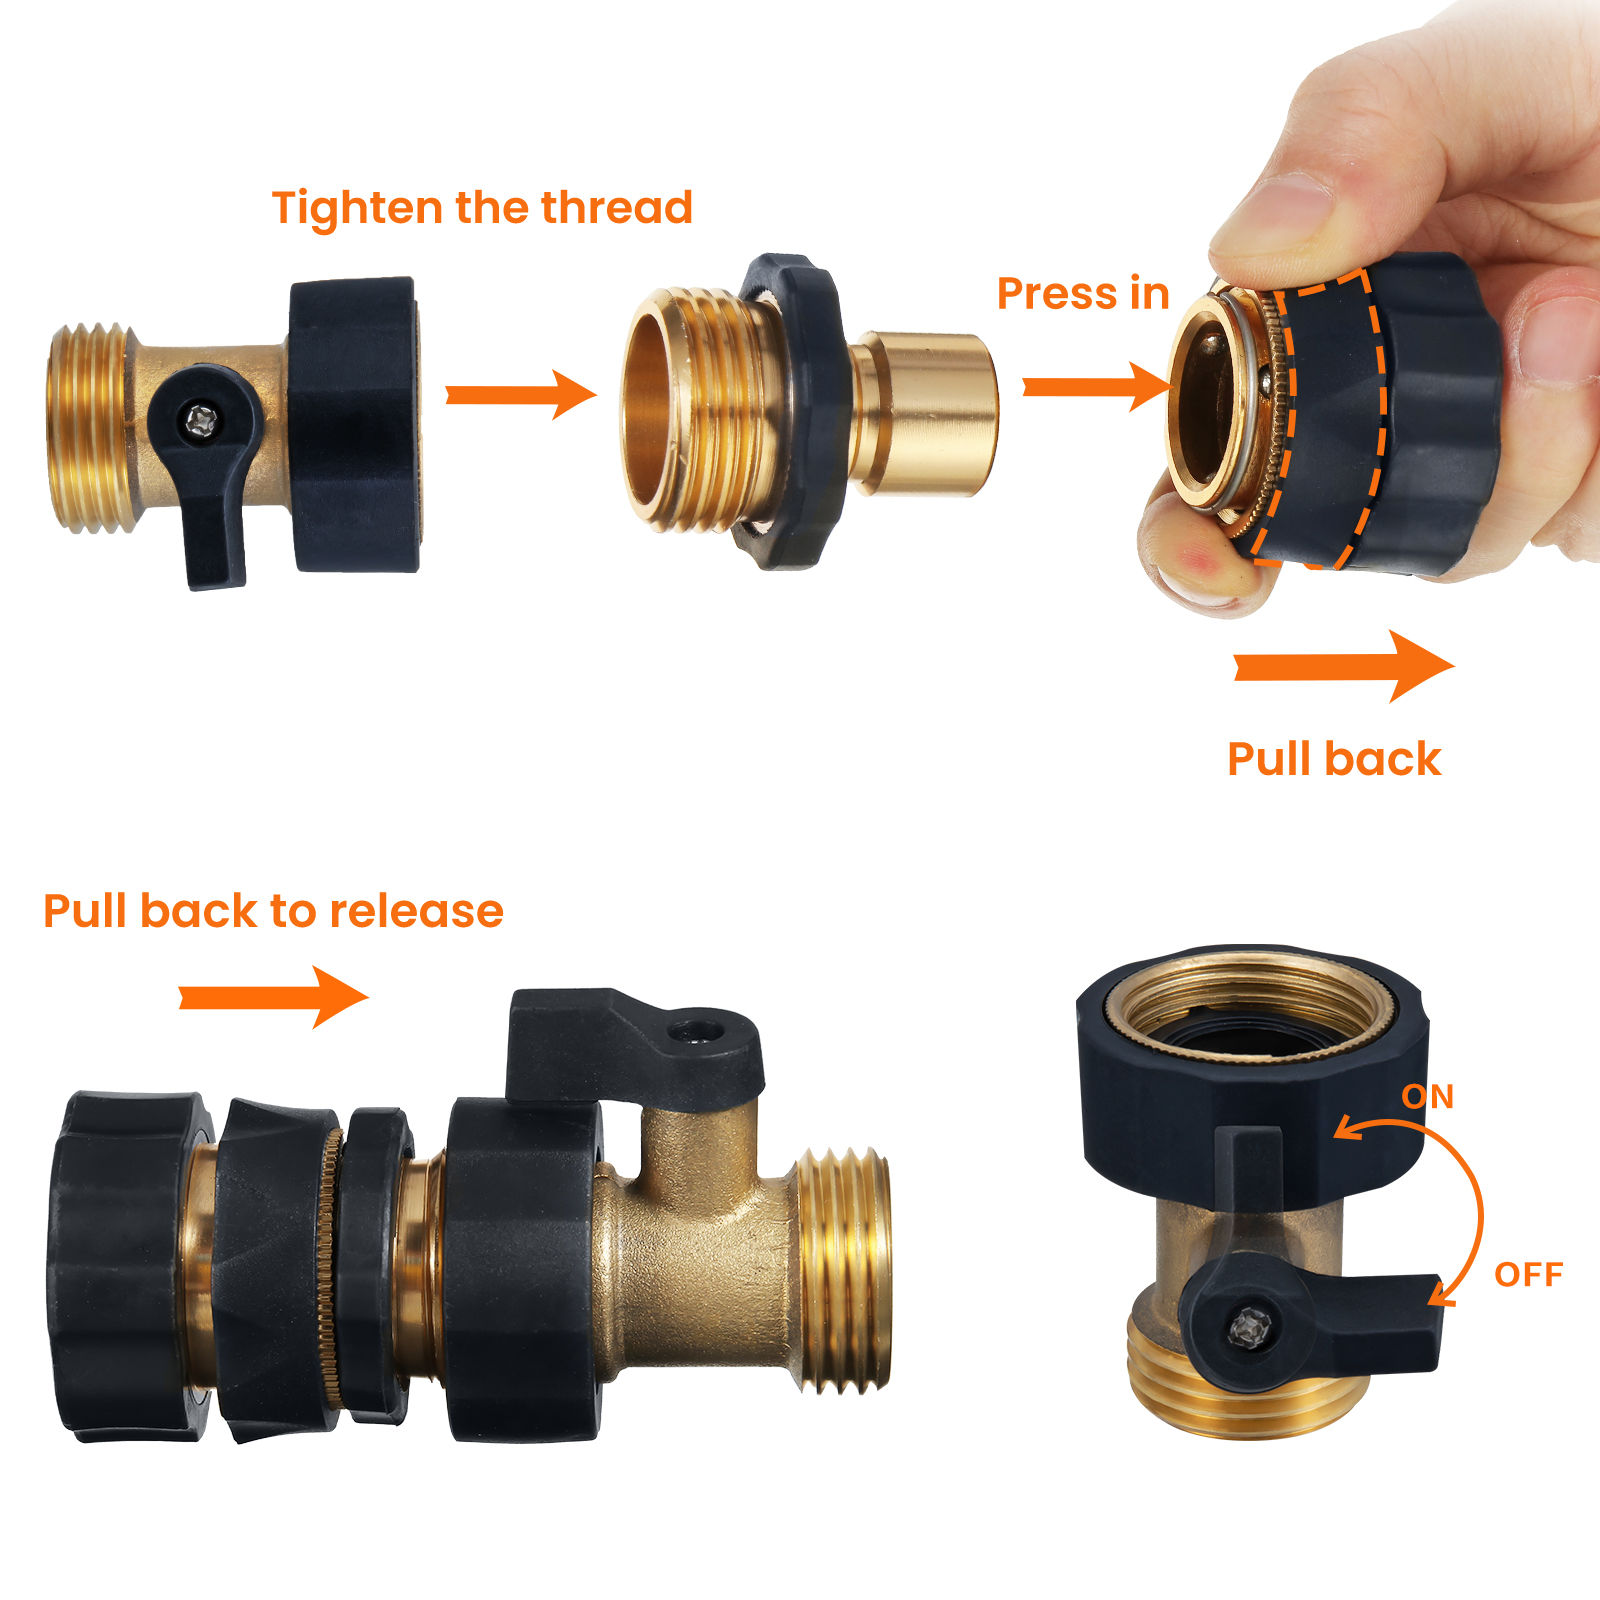 34-Garden-Hose-Quick-Connect-Water-Hose-Fit-Brass-Female-Male-Connector-Set-1943824-7